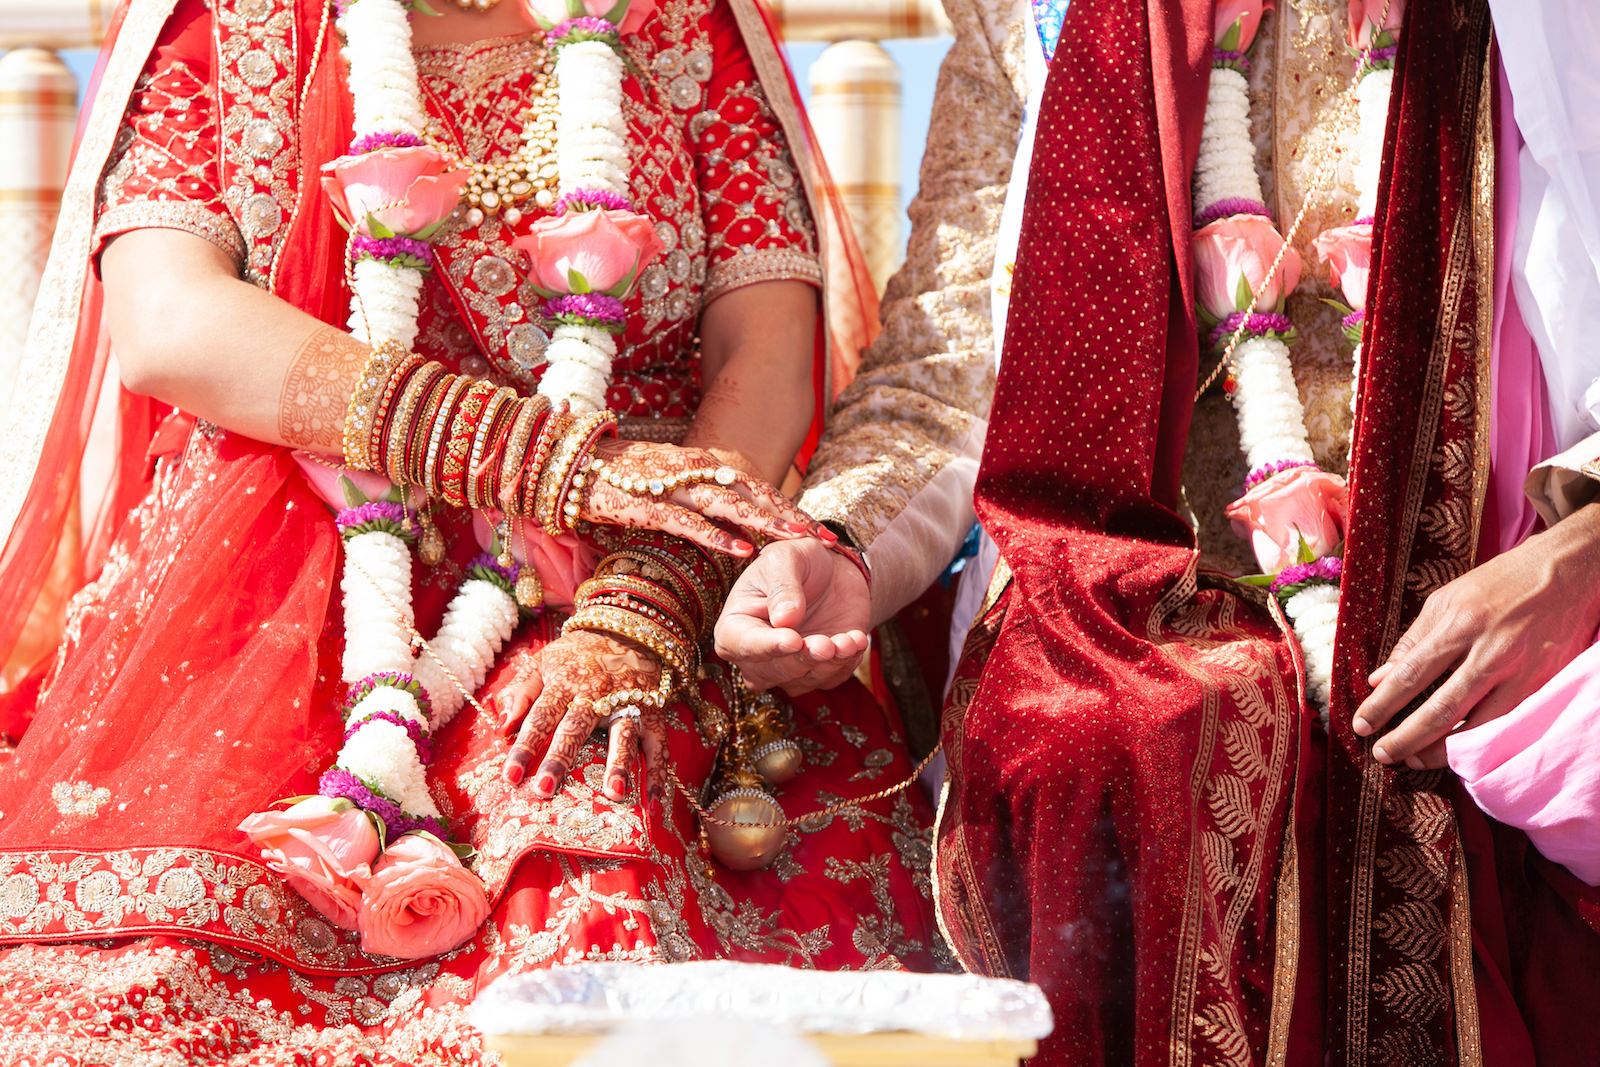 Tampa Clearwater Beach Indian Wedding Bride and Groom with Henna